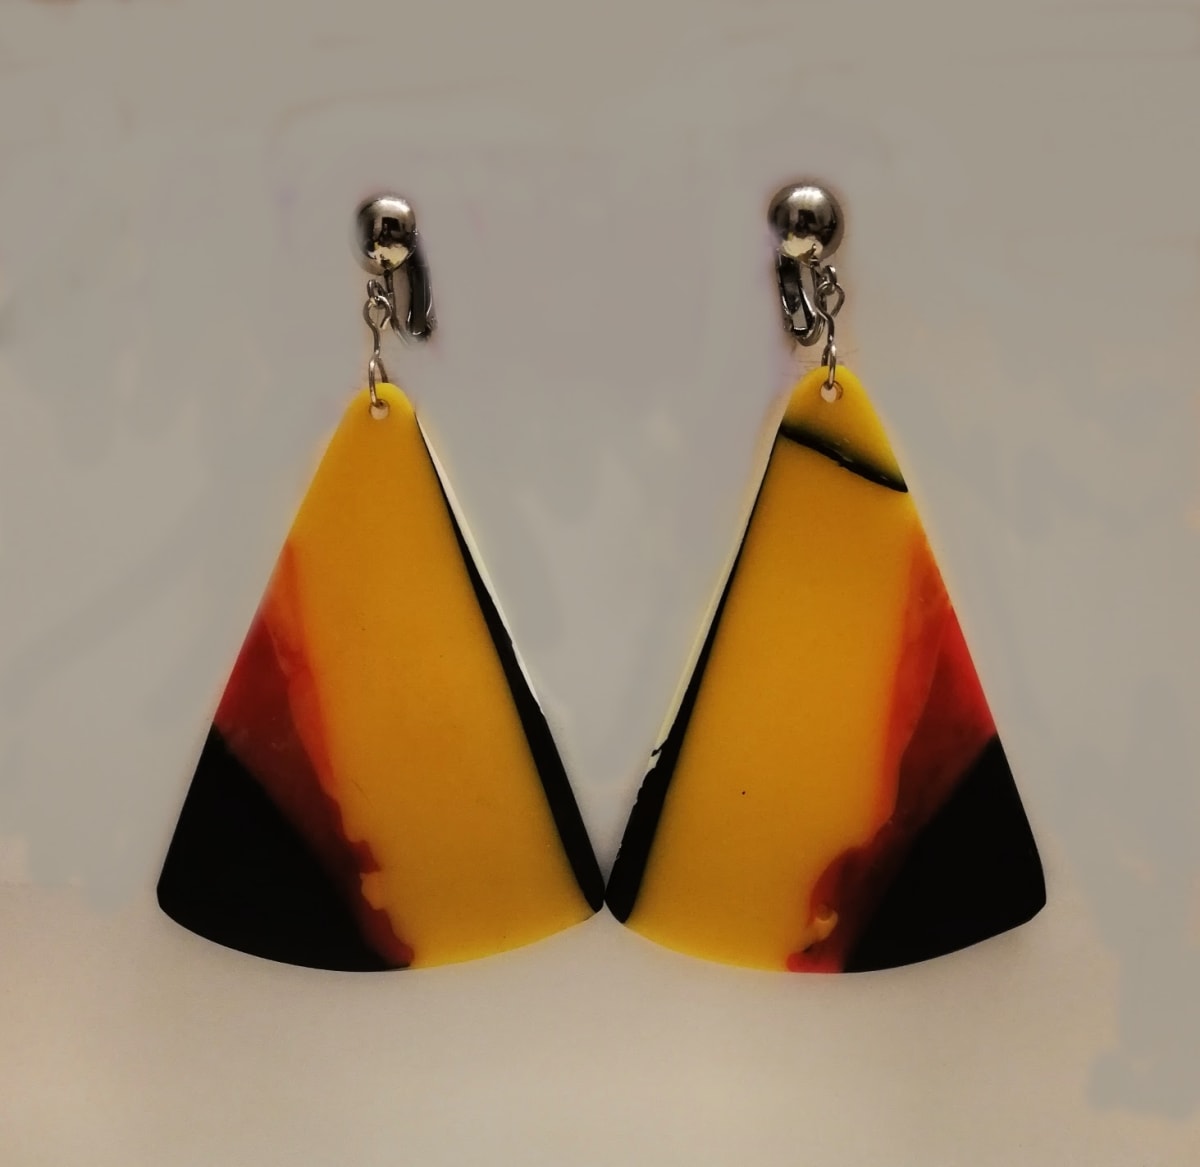 Black, yellow and red 'slice' earrings sterling silver clips  Image: Black, yellow and red 'slice' earrings sterling silver clips